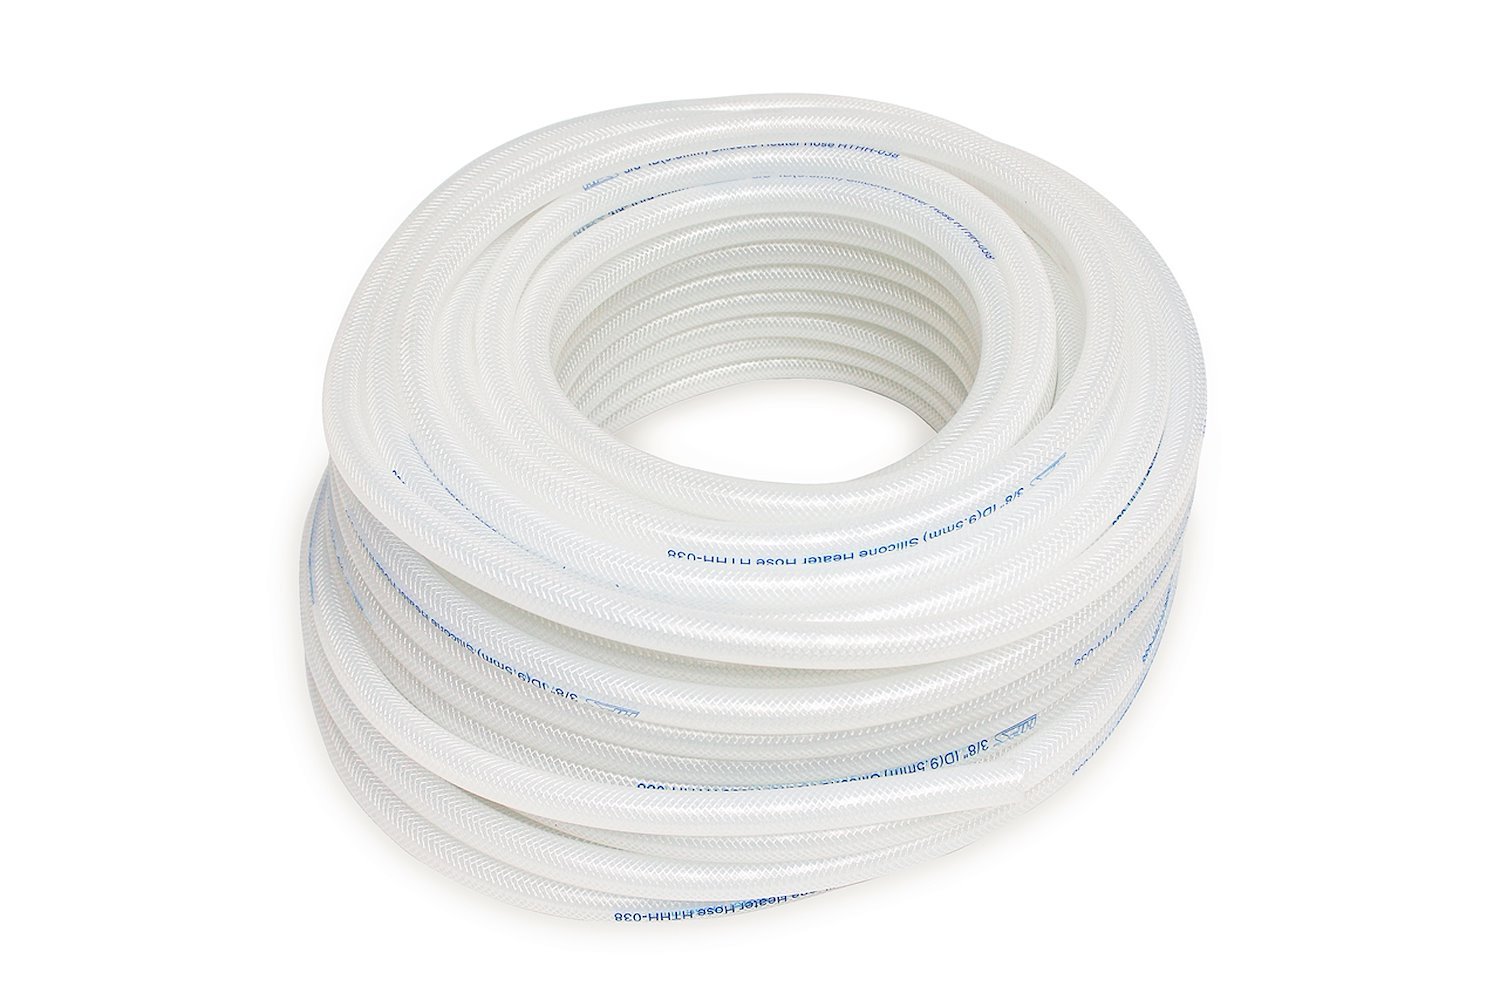 HTHH-050-CLEARx50 Silicone Heater Hose Tubing, High-Temp Reinforced, 1/2 in. ID, 50 ft. Roll, Clear